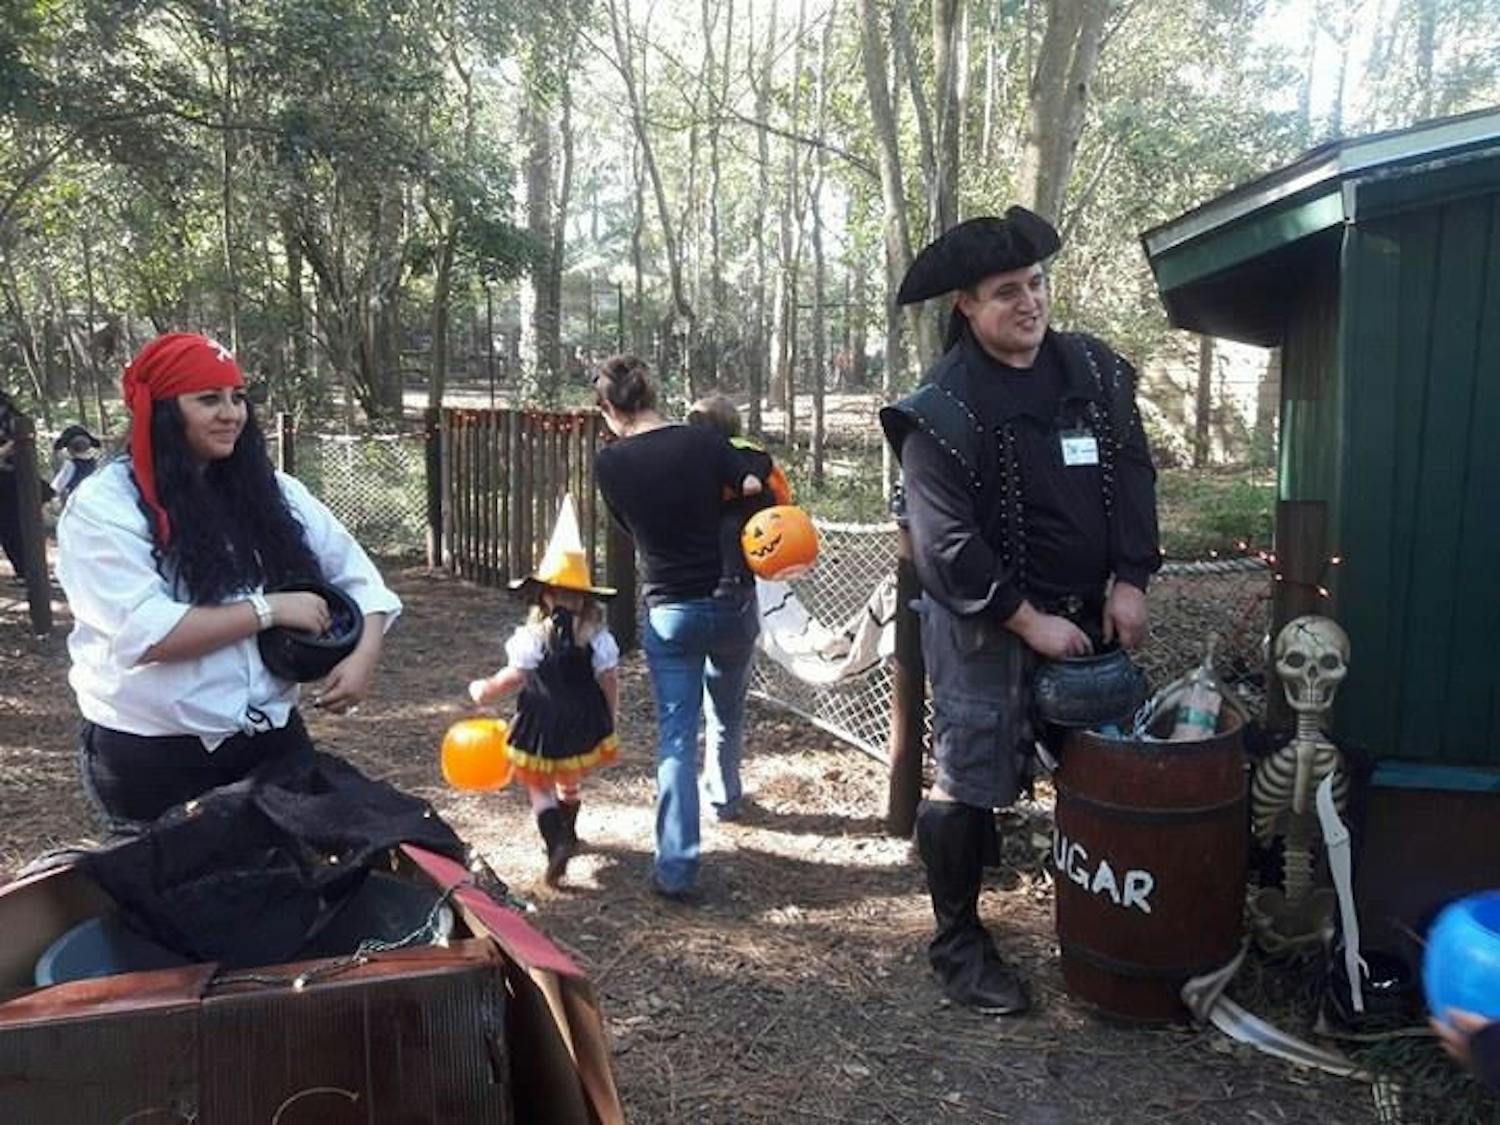 Students of Santa Fe’s zoo animal technology program dressed as pirates and passed out candy during Boo at the Zoo in 2017.